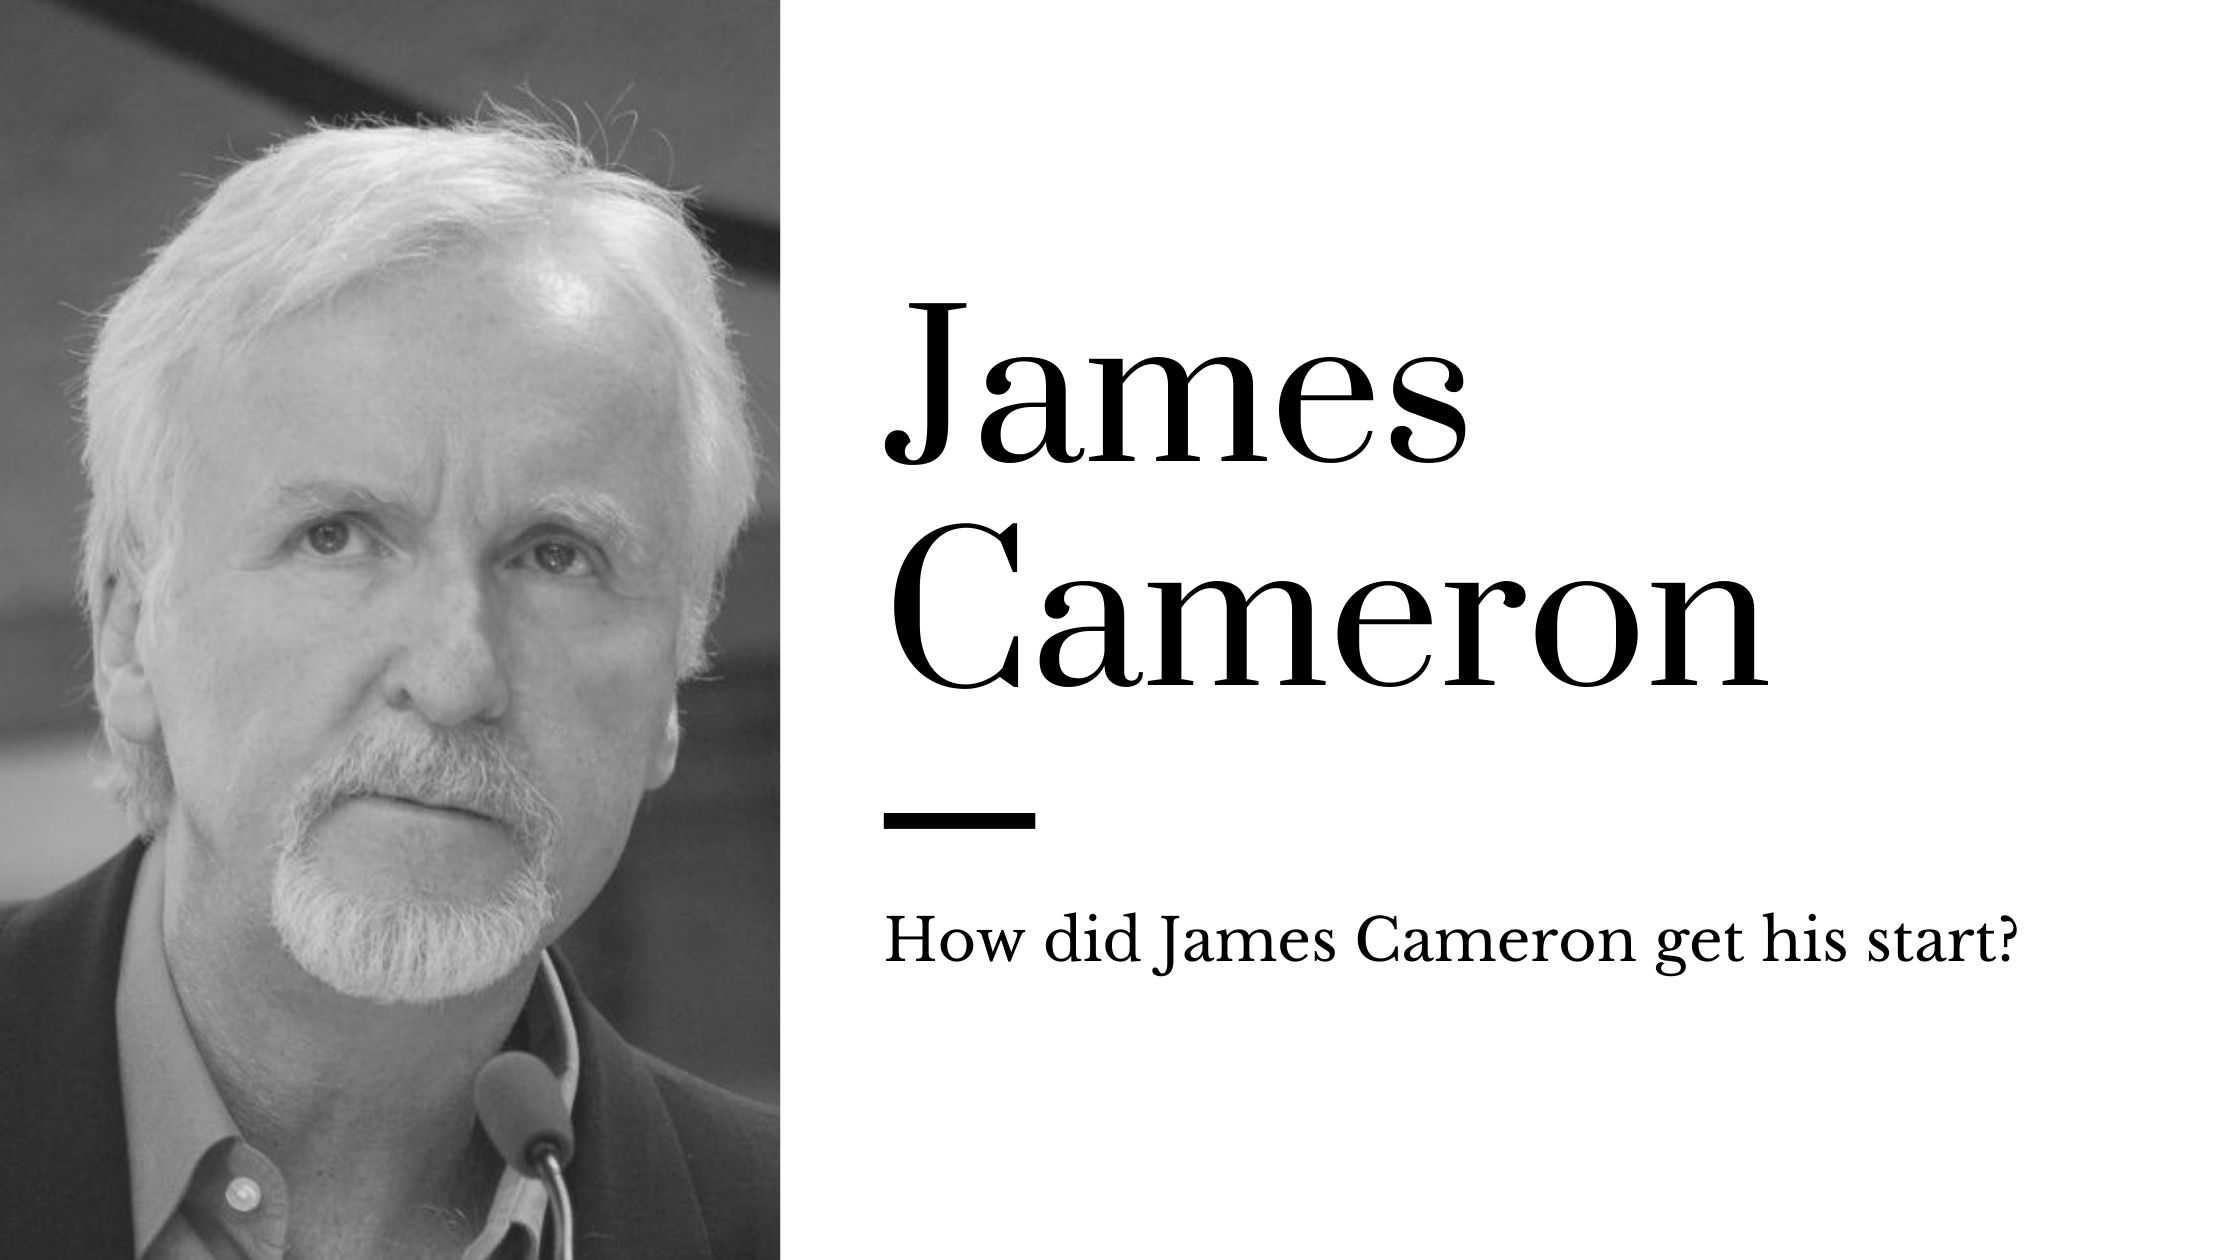 How did James Cameron get his start?